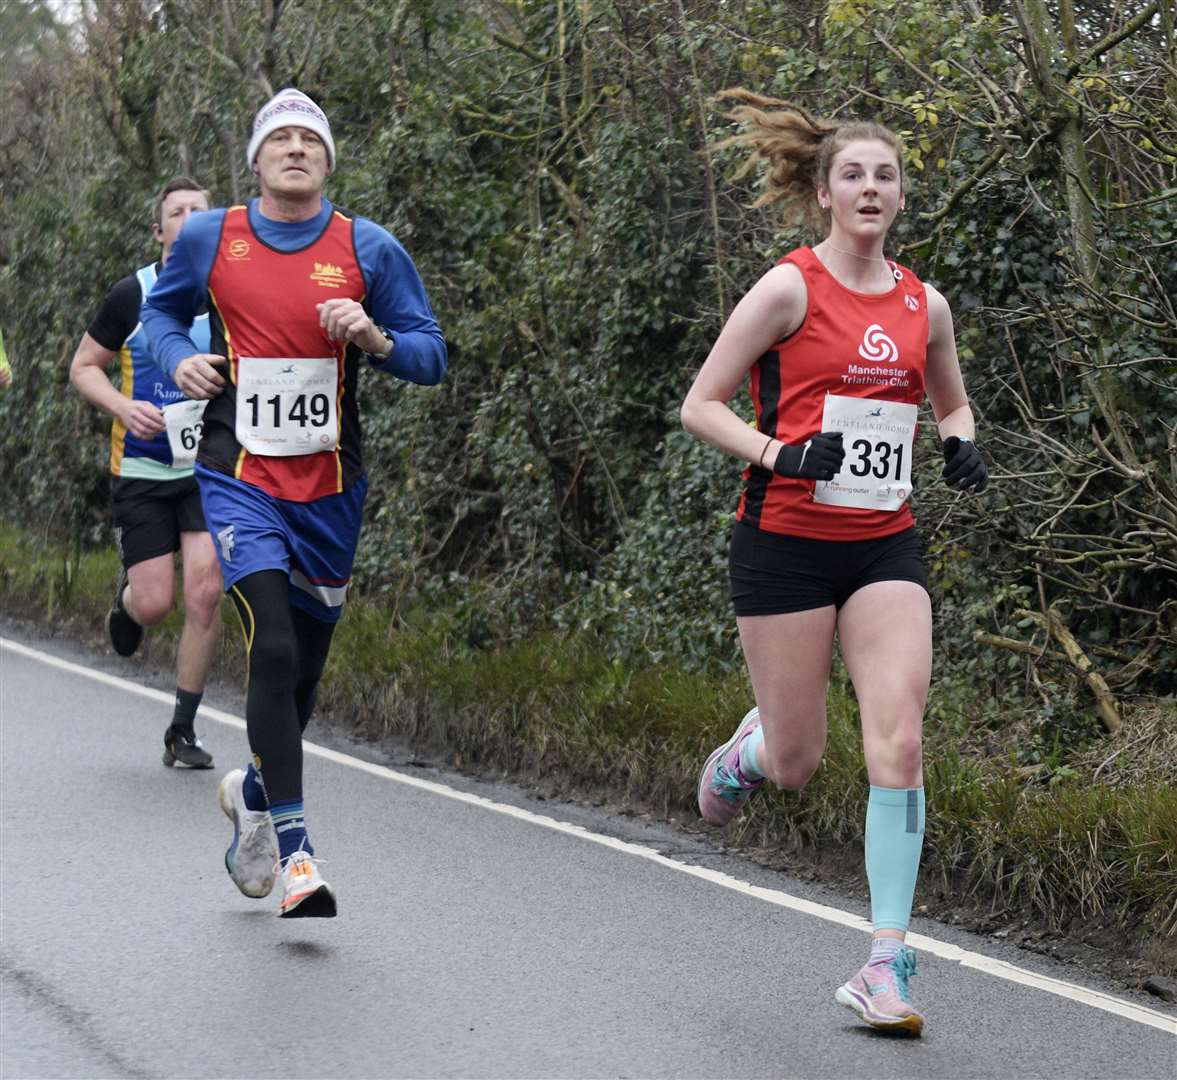 Gary Spicer of Sittingbourne Striders and Liz Delamain of Petts Wood Runners pick up the pace. Picture: Barry Goodwin (62013790)